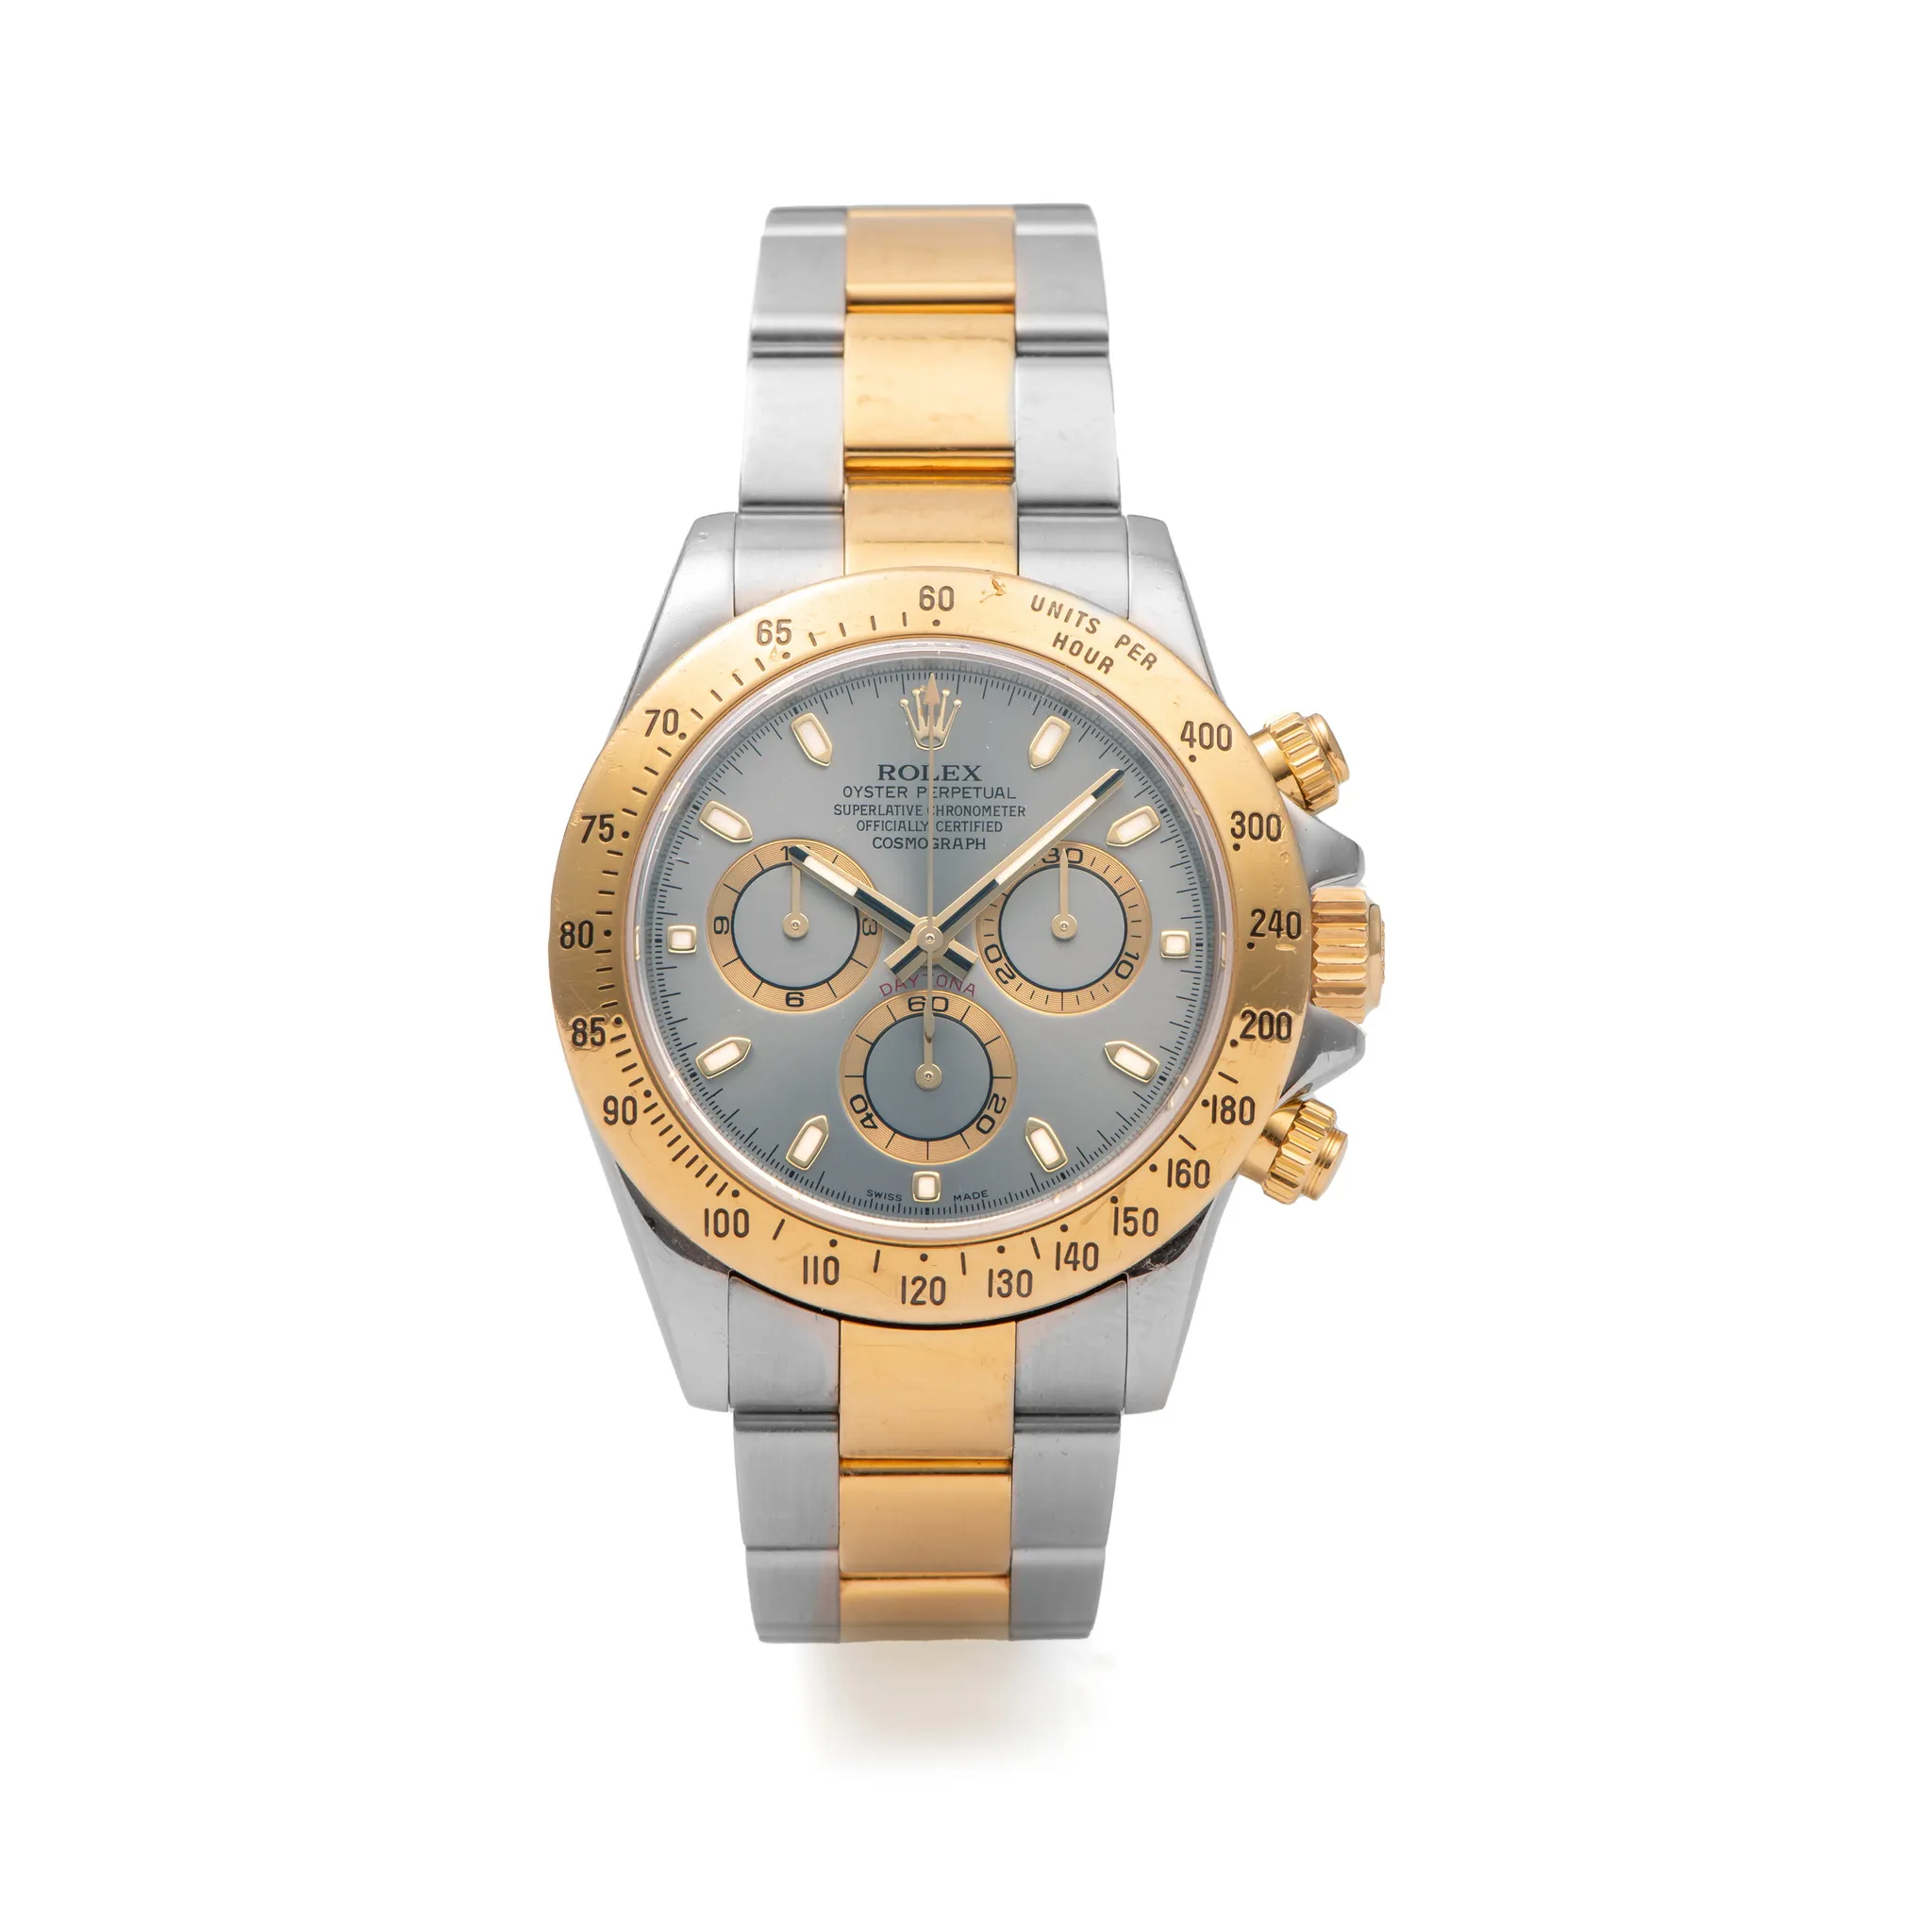 Rolex Daytona 116523 39mm Yellow gold and stainless steel Gray